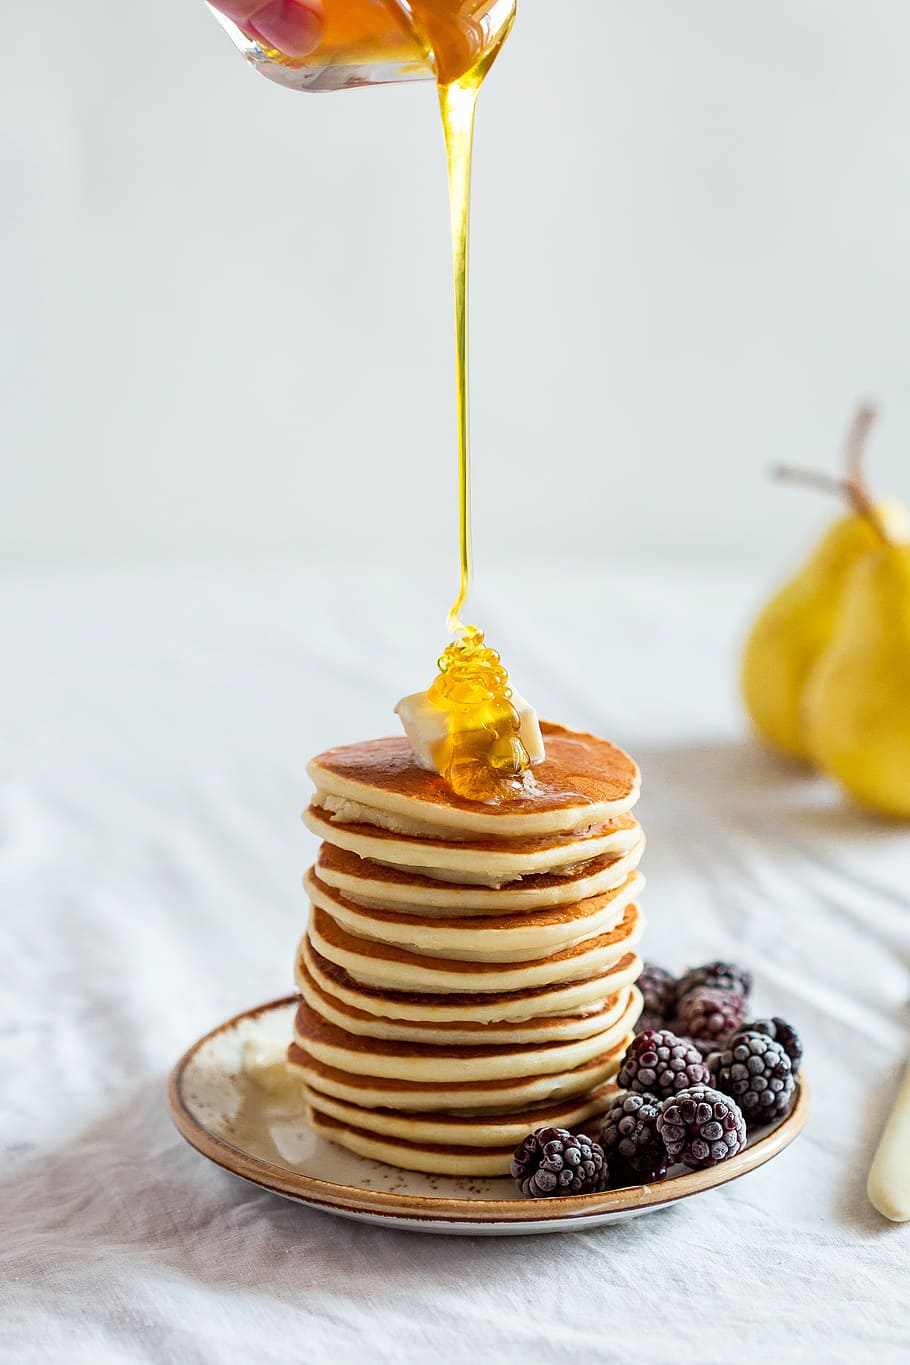 honey drizzled on stack of pancakes served on ceramic plate, hash browns, HD wallpaper